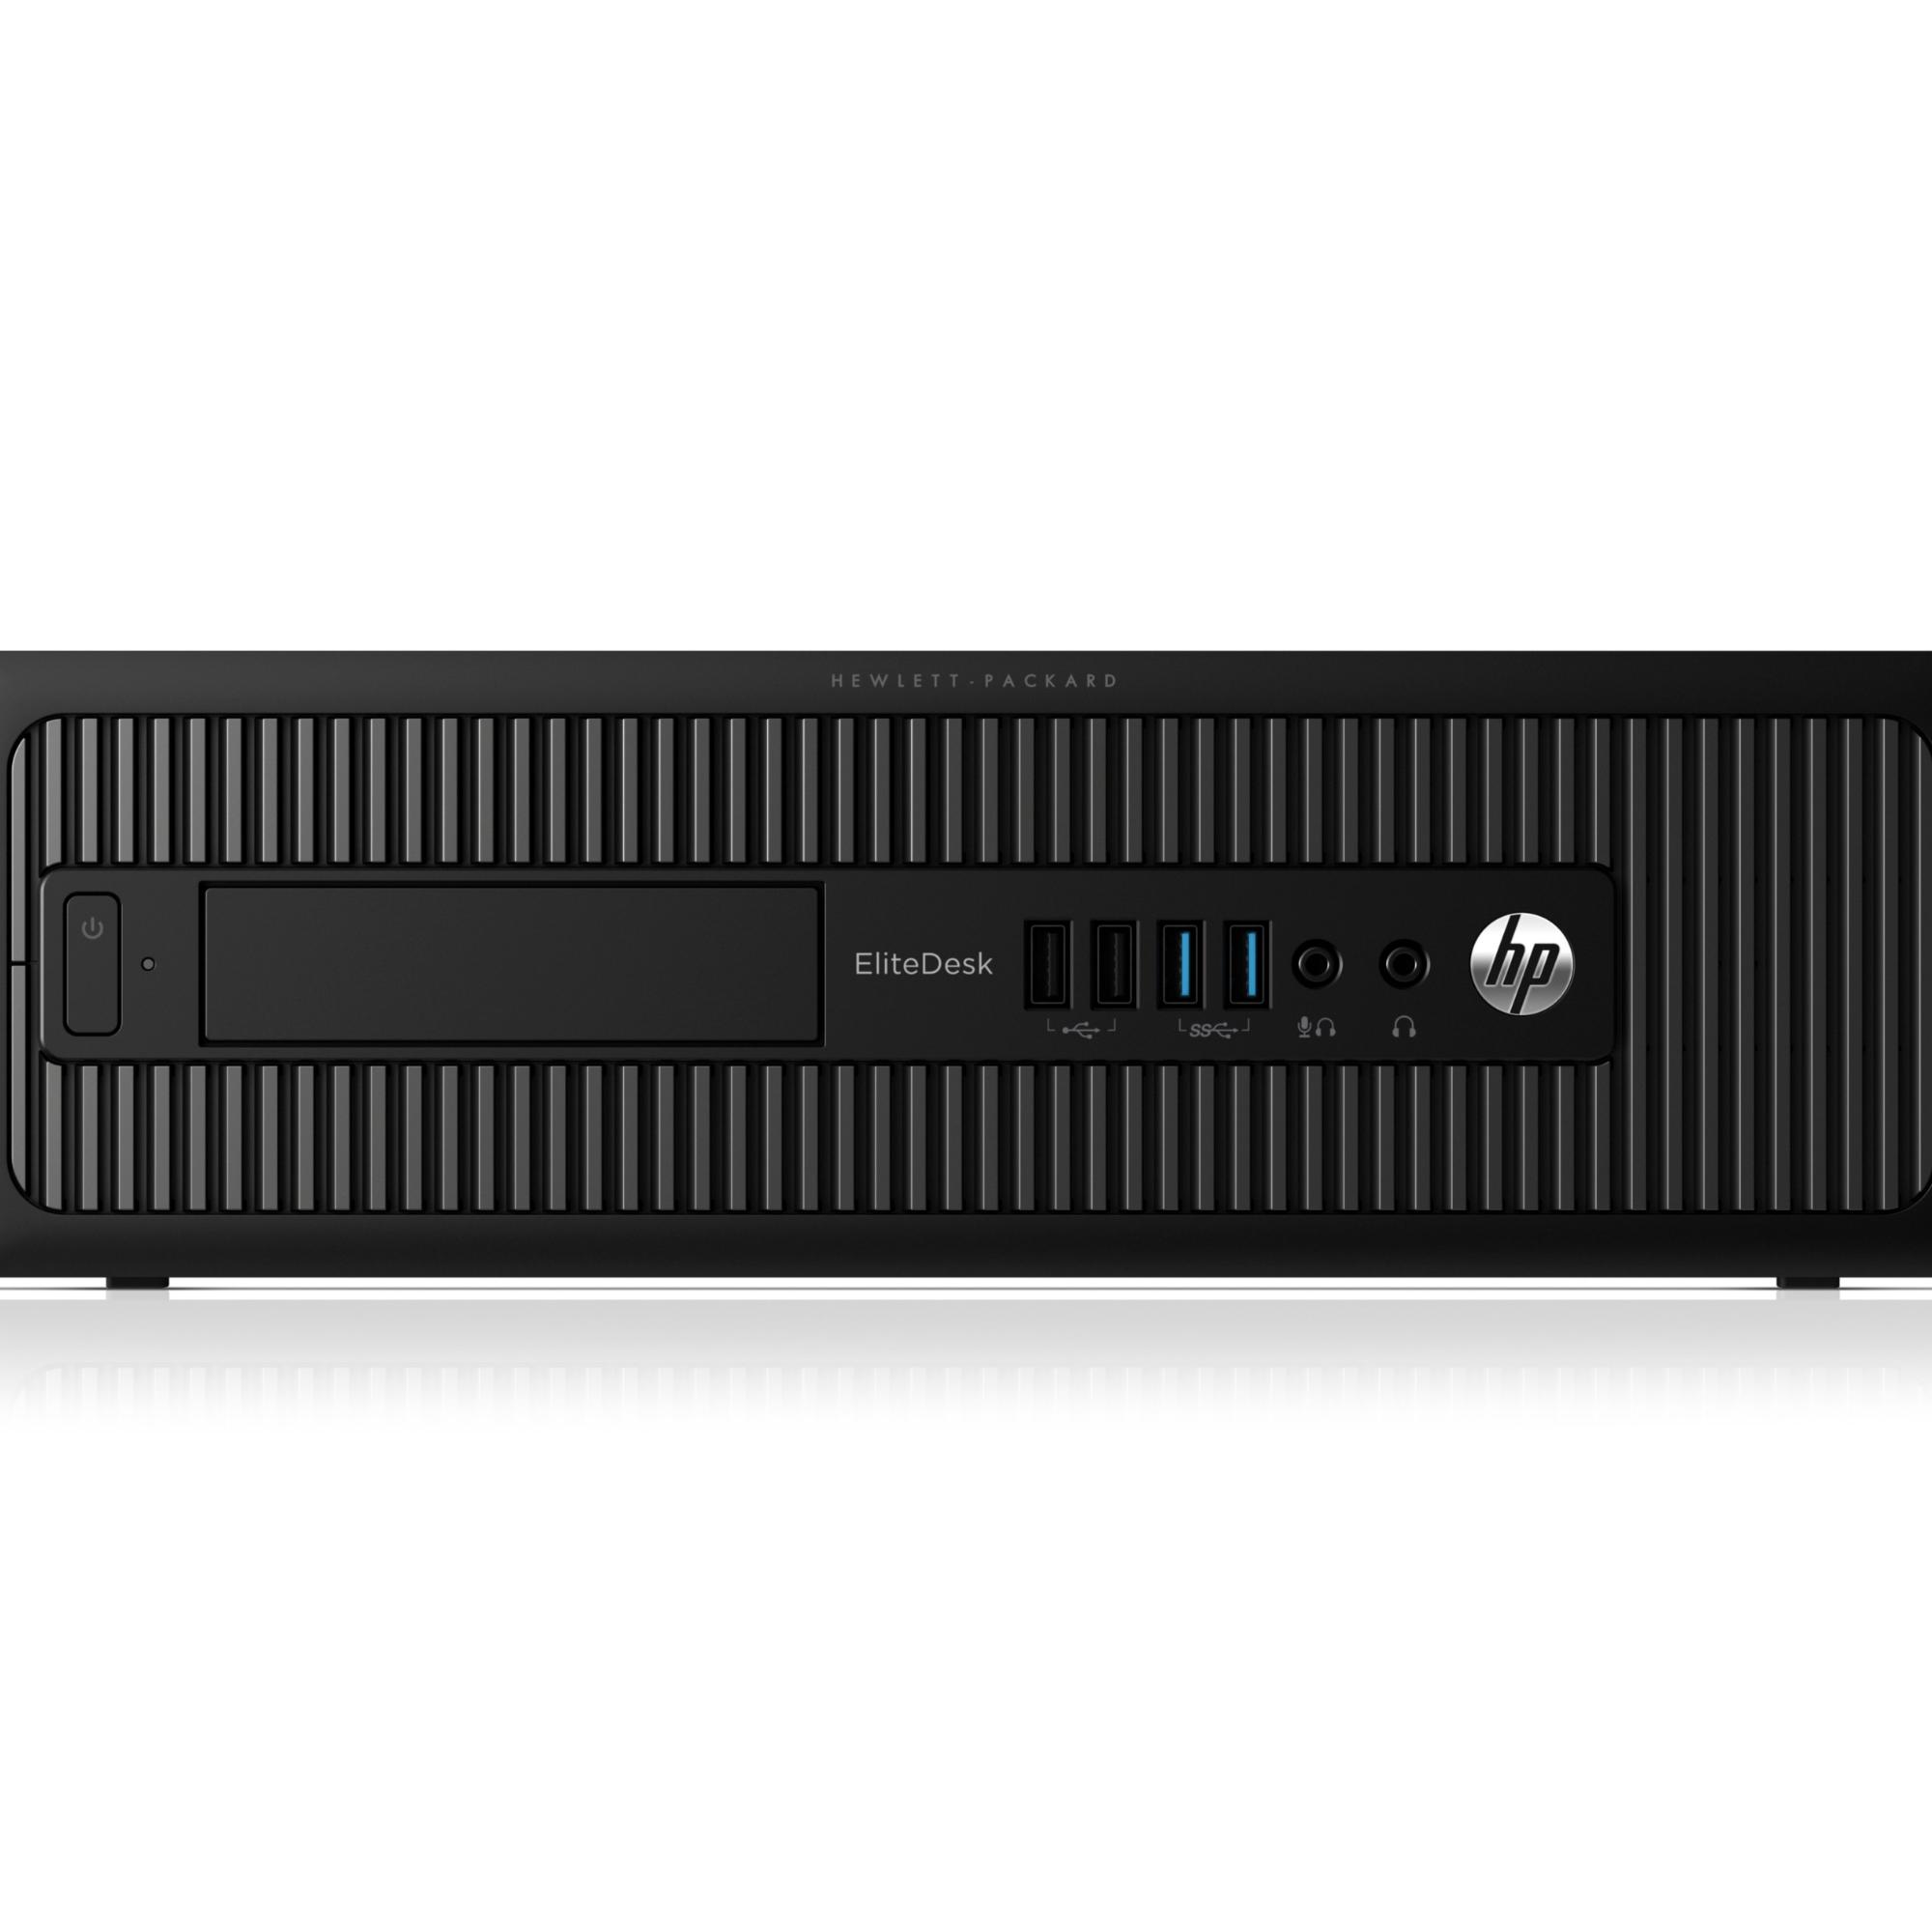 Tower – HP 705 G1 / A10 Pro-7800B / 120GB SSD / 8GB / AMD RADEON HD / W10P – G0K5-26879-08-B<br><br><span STYLE="background:#39ac37;"><font color="white"> DISPONIBILE </font></span>